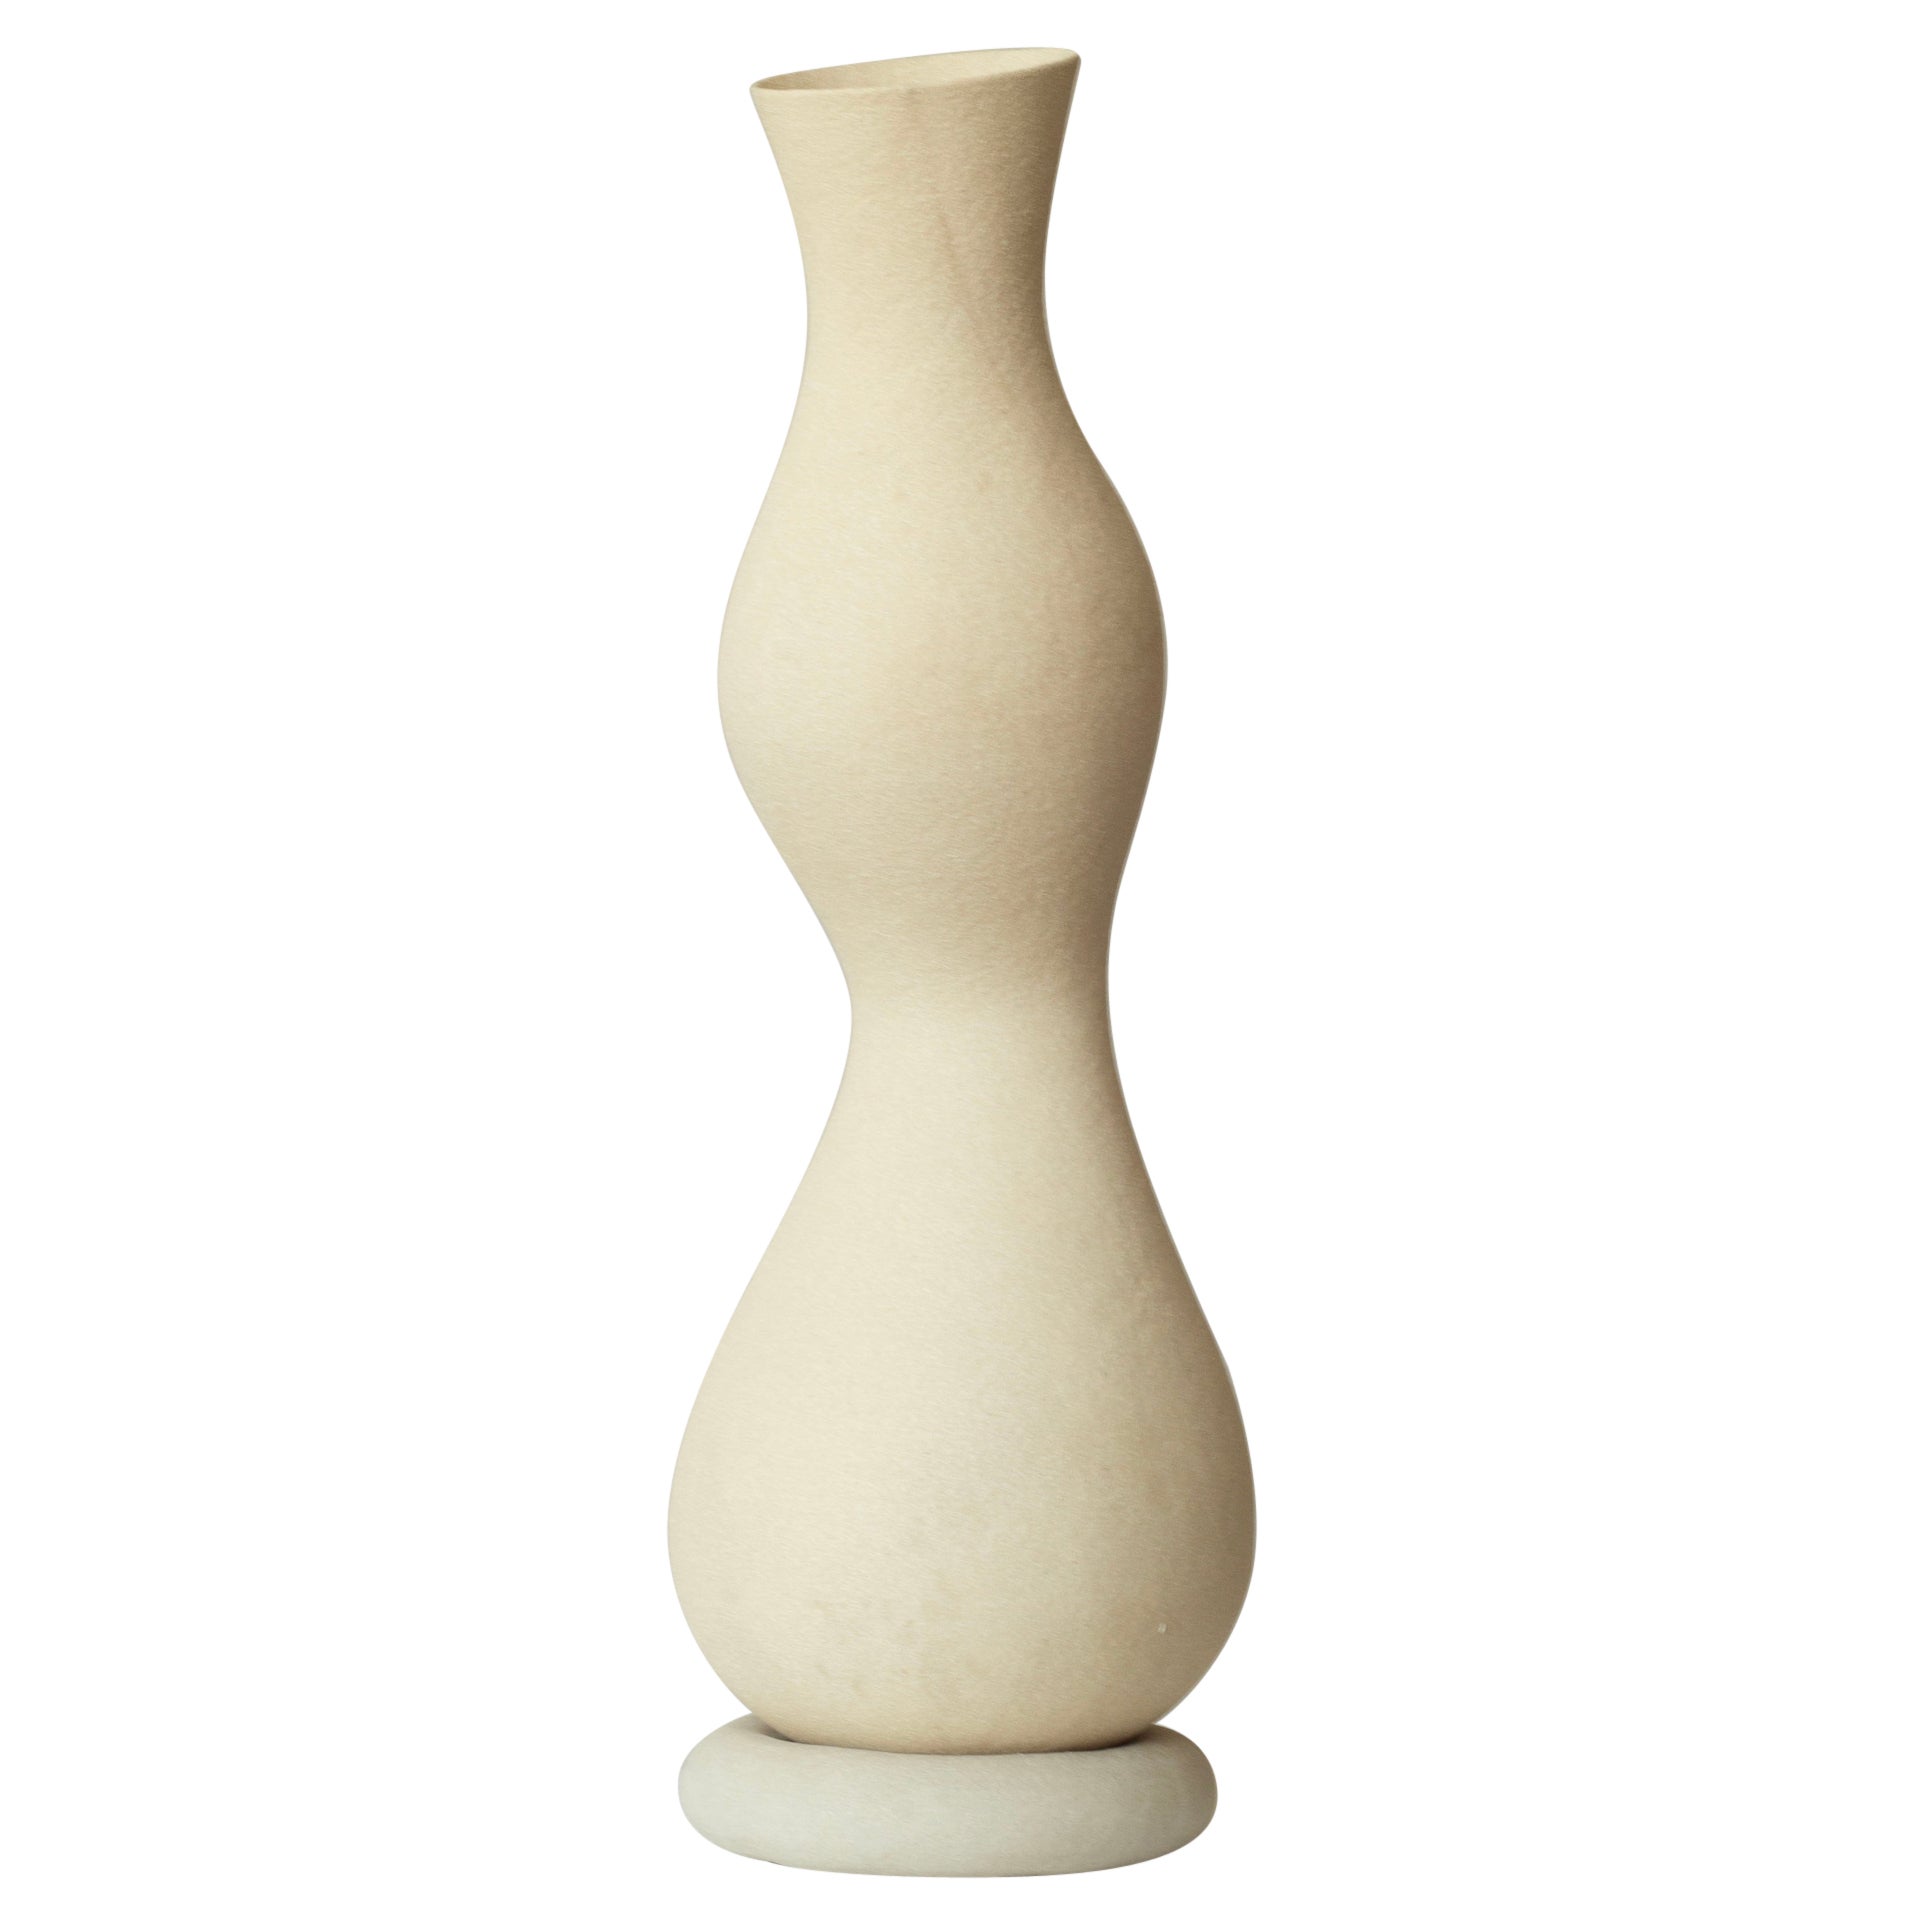 Woman Cracked But Healed 221 Vase by Karina Smagulova For Sale